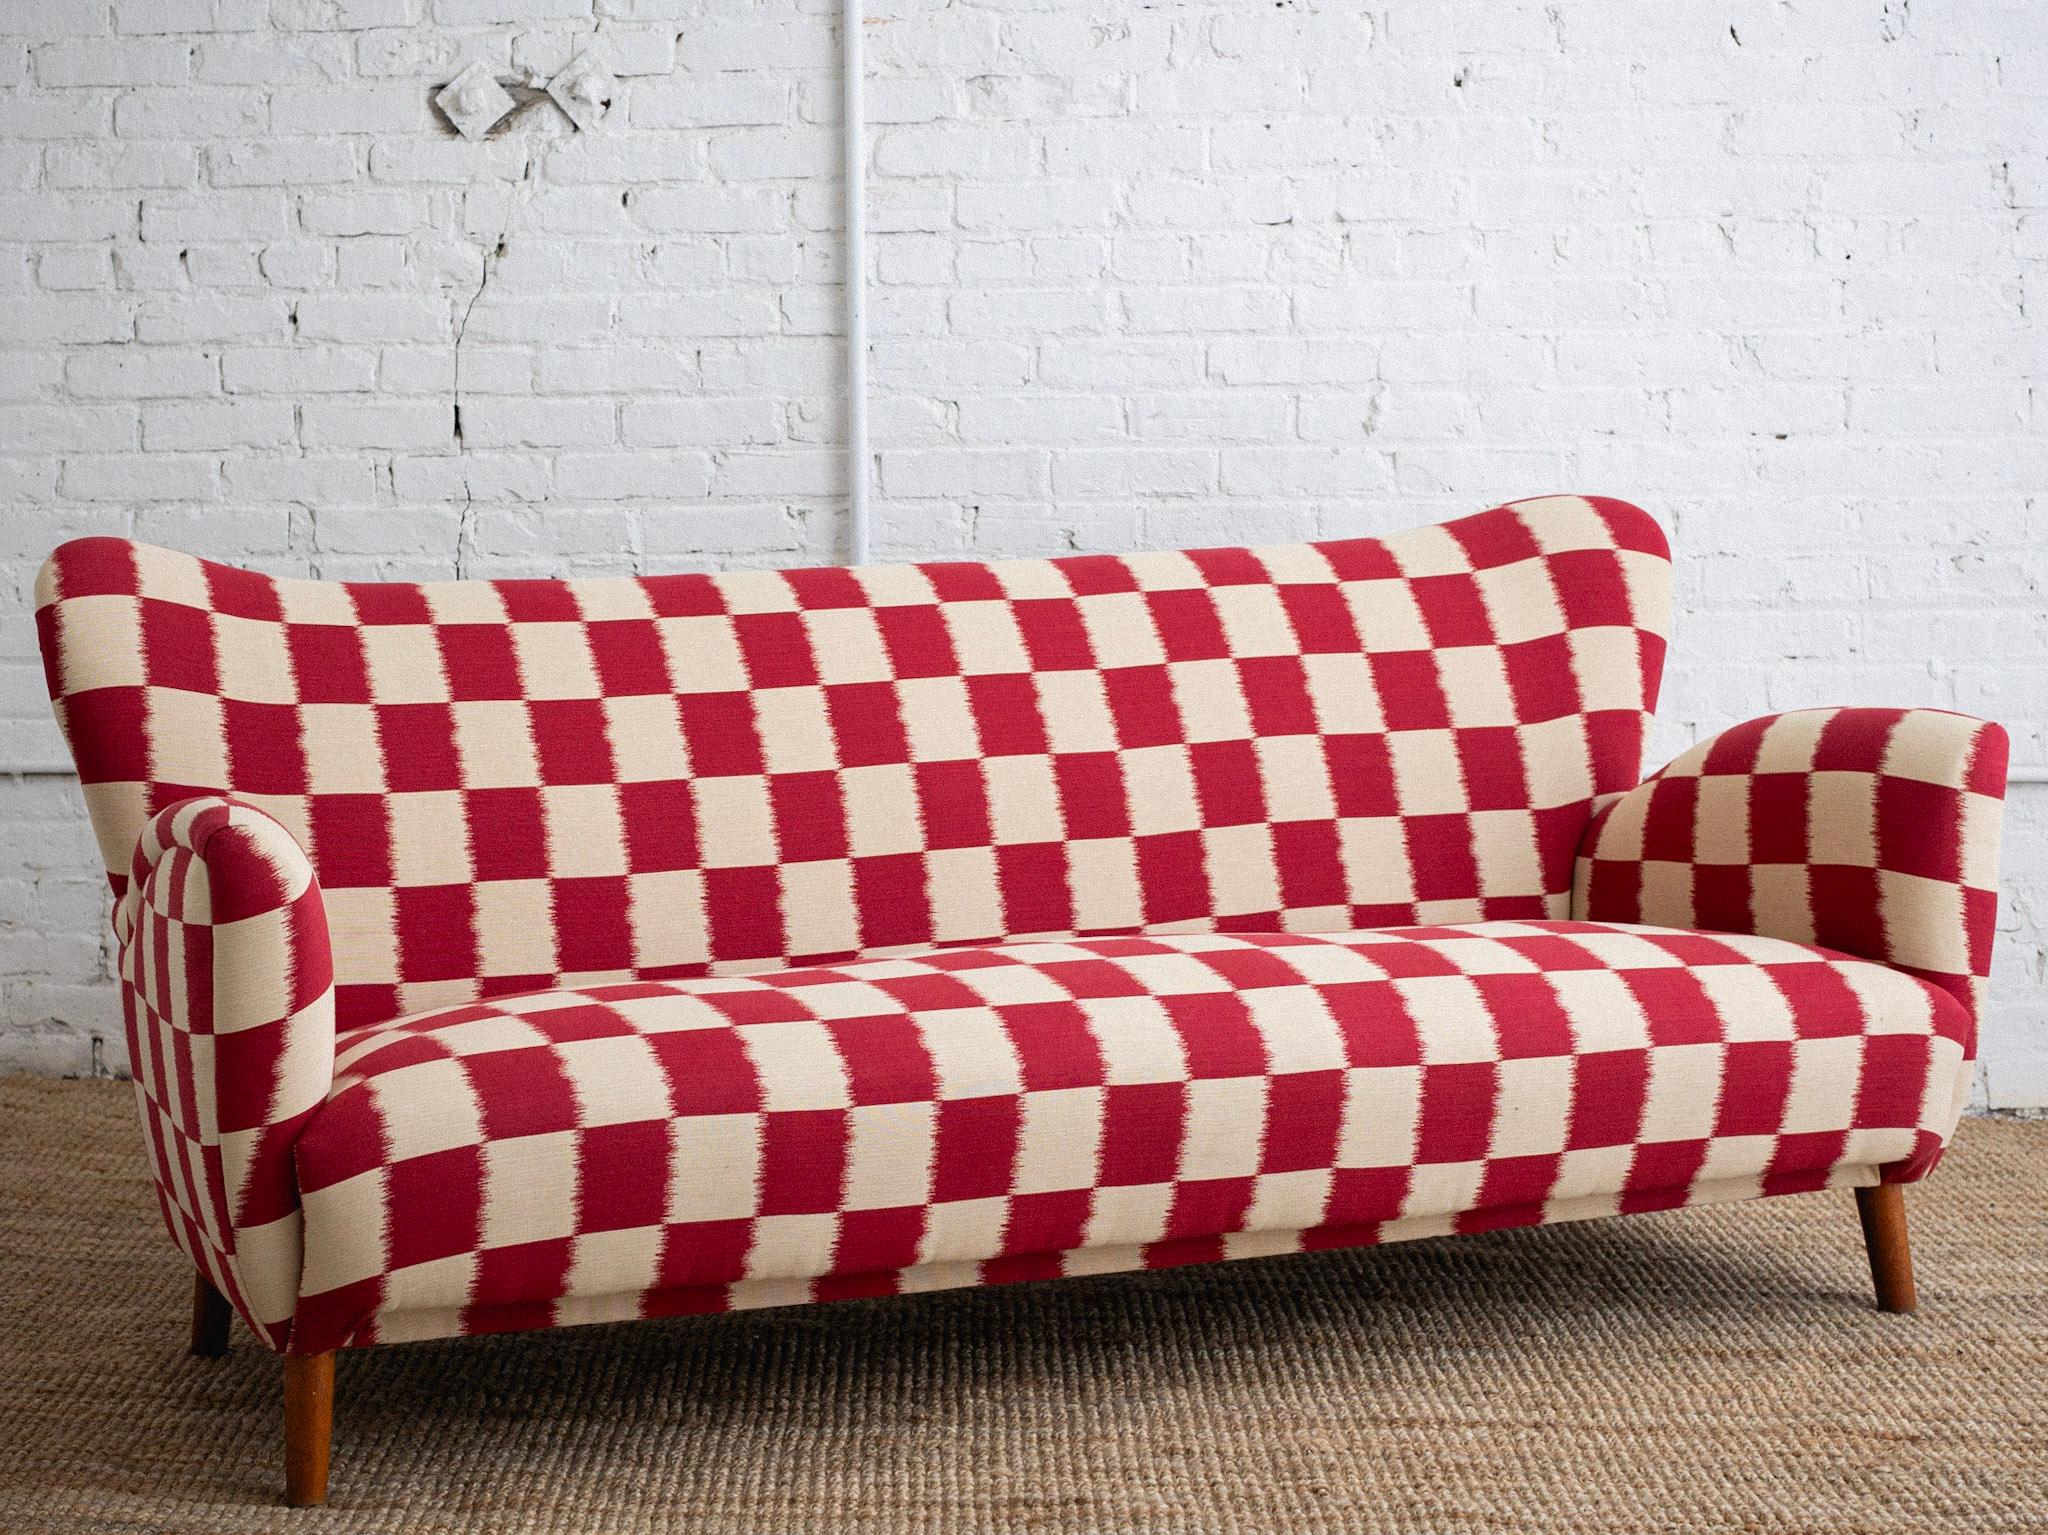 A mid century Italian sofa. Low profile and wingback style silhouette. Newly reupholstered in a red and cream ikat checkered jacquard. Sourced outside of Florence, Italy. Matching side chair also available, sold separately.